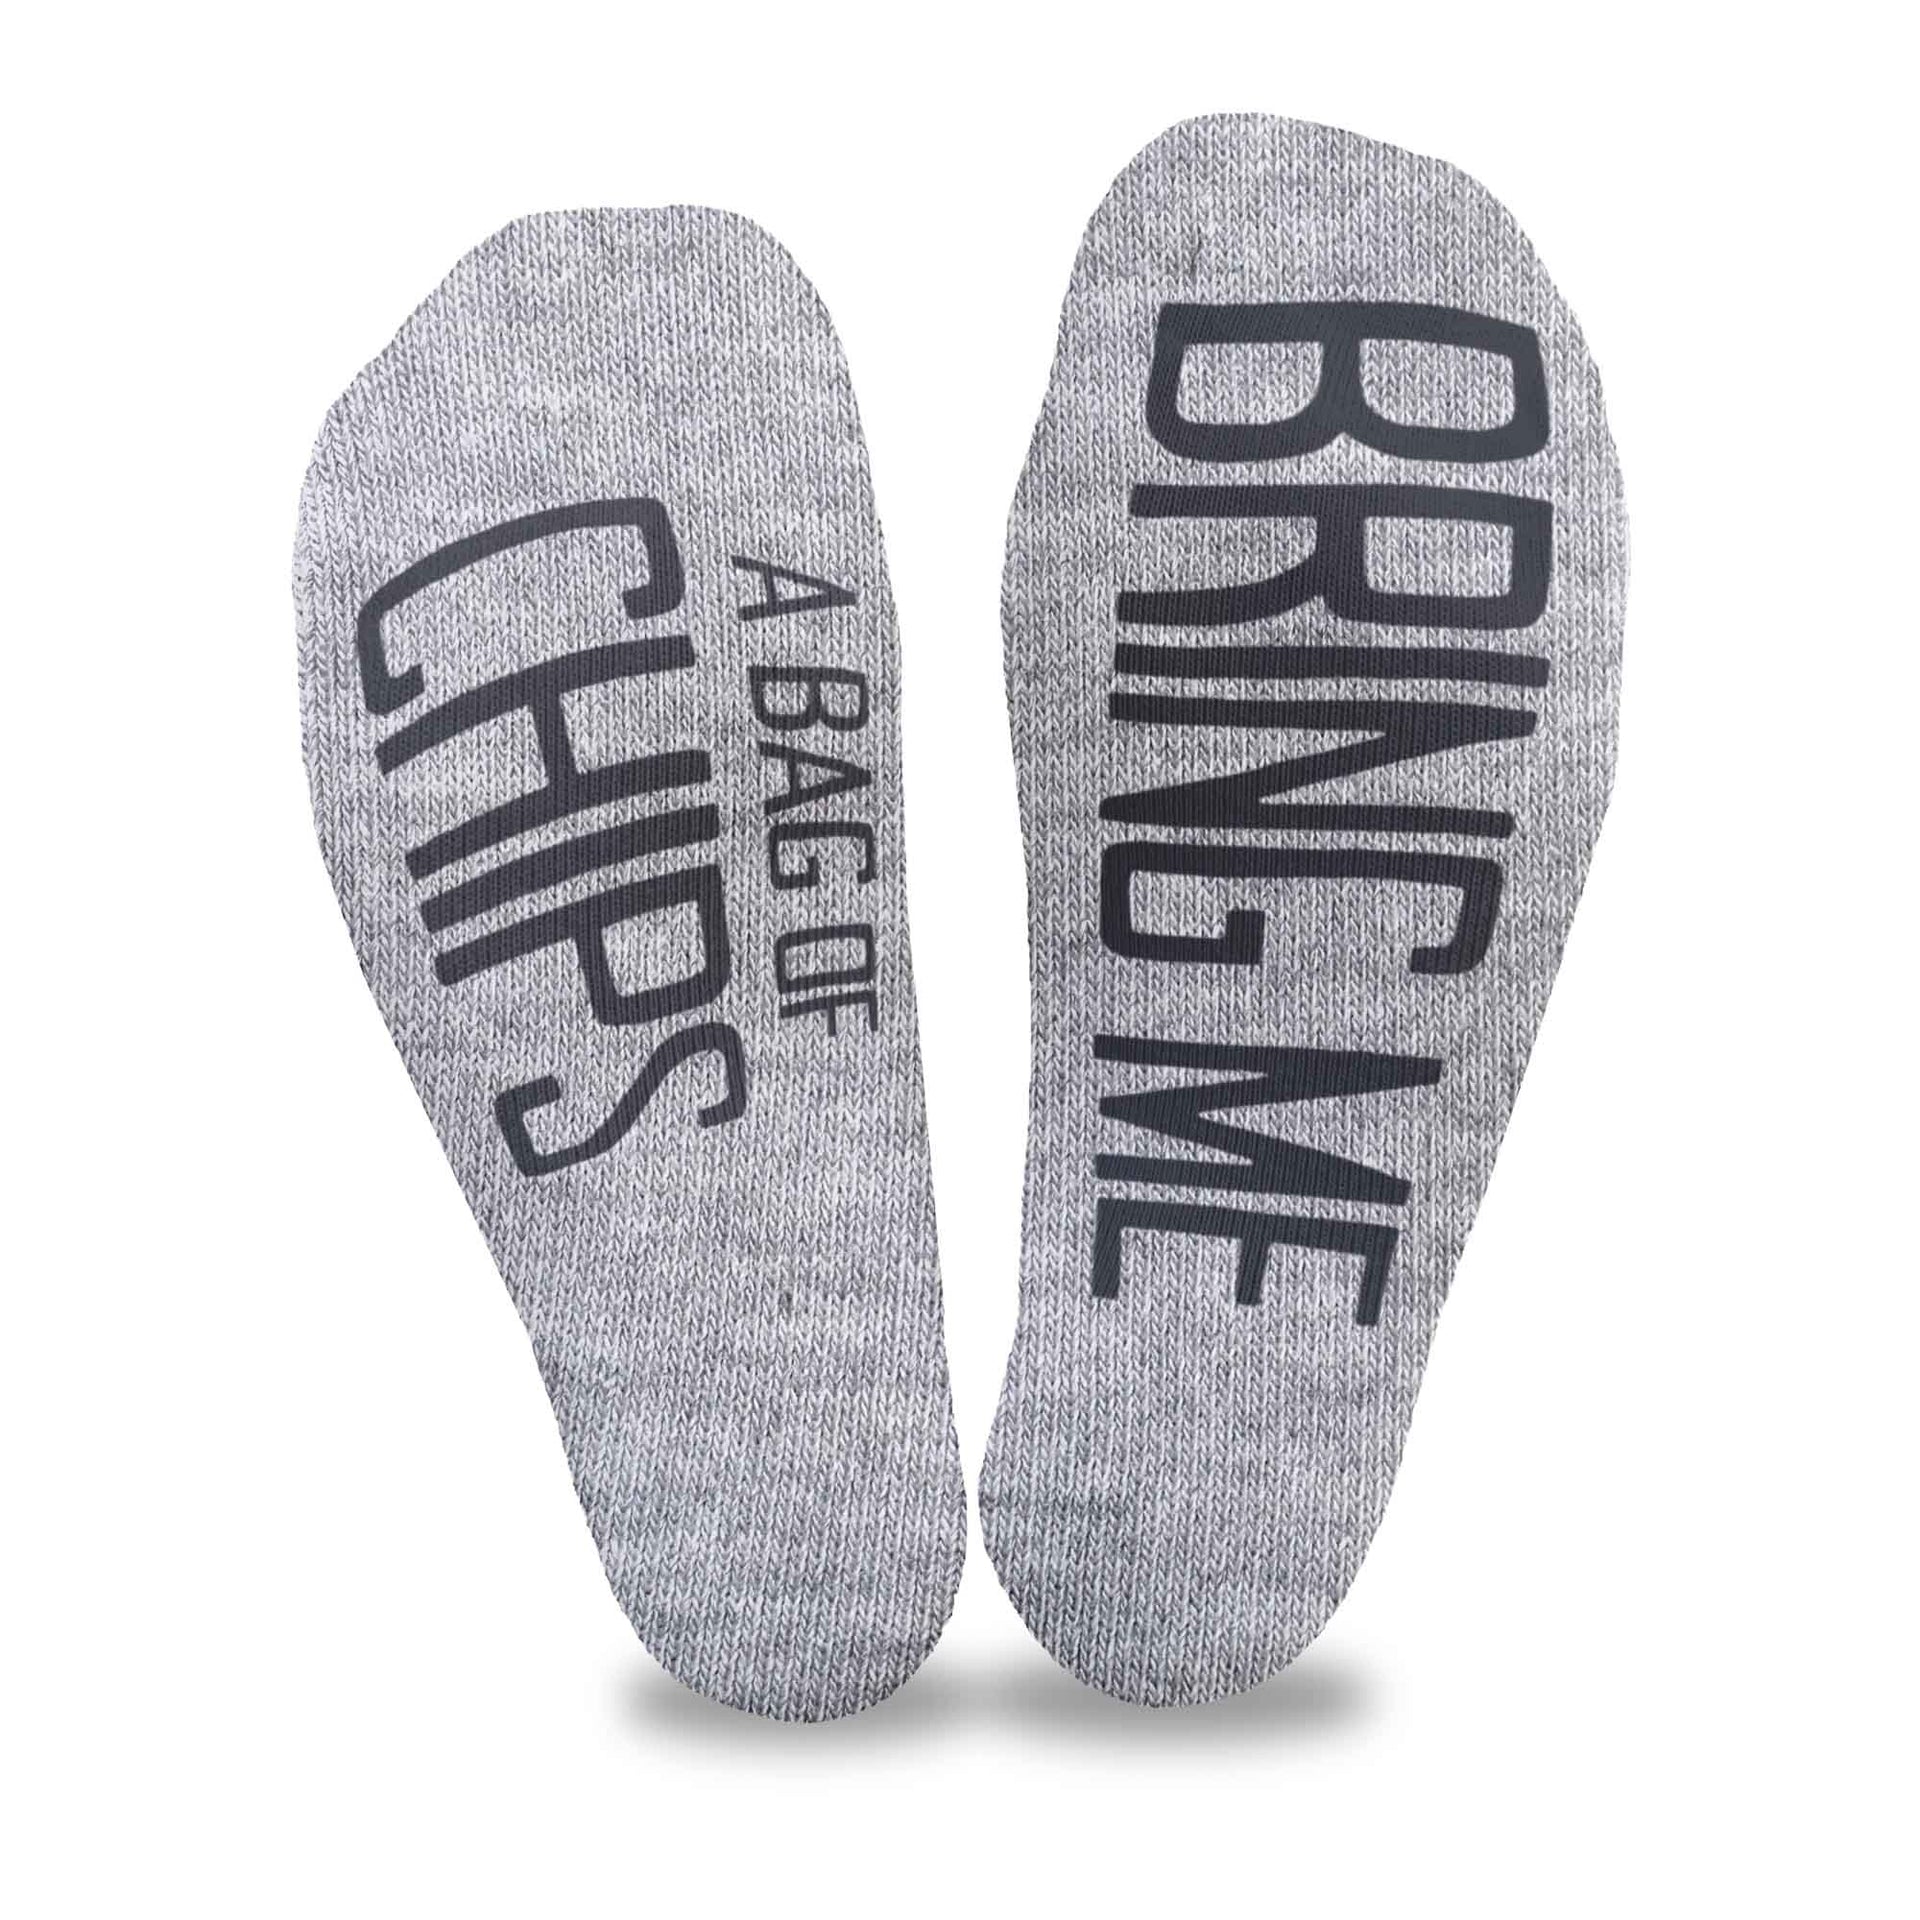 Bring me a bag of chips custom printed on the bottom soles of heather gray no show socks make a great gift idea for someone special.